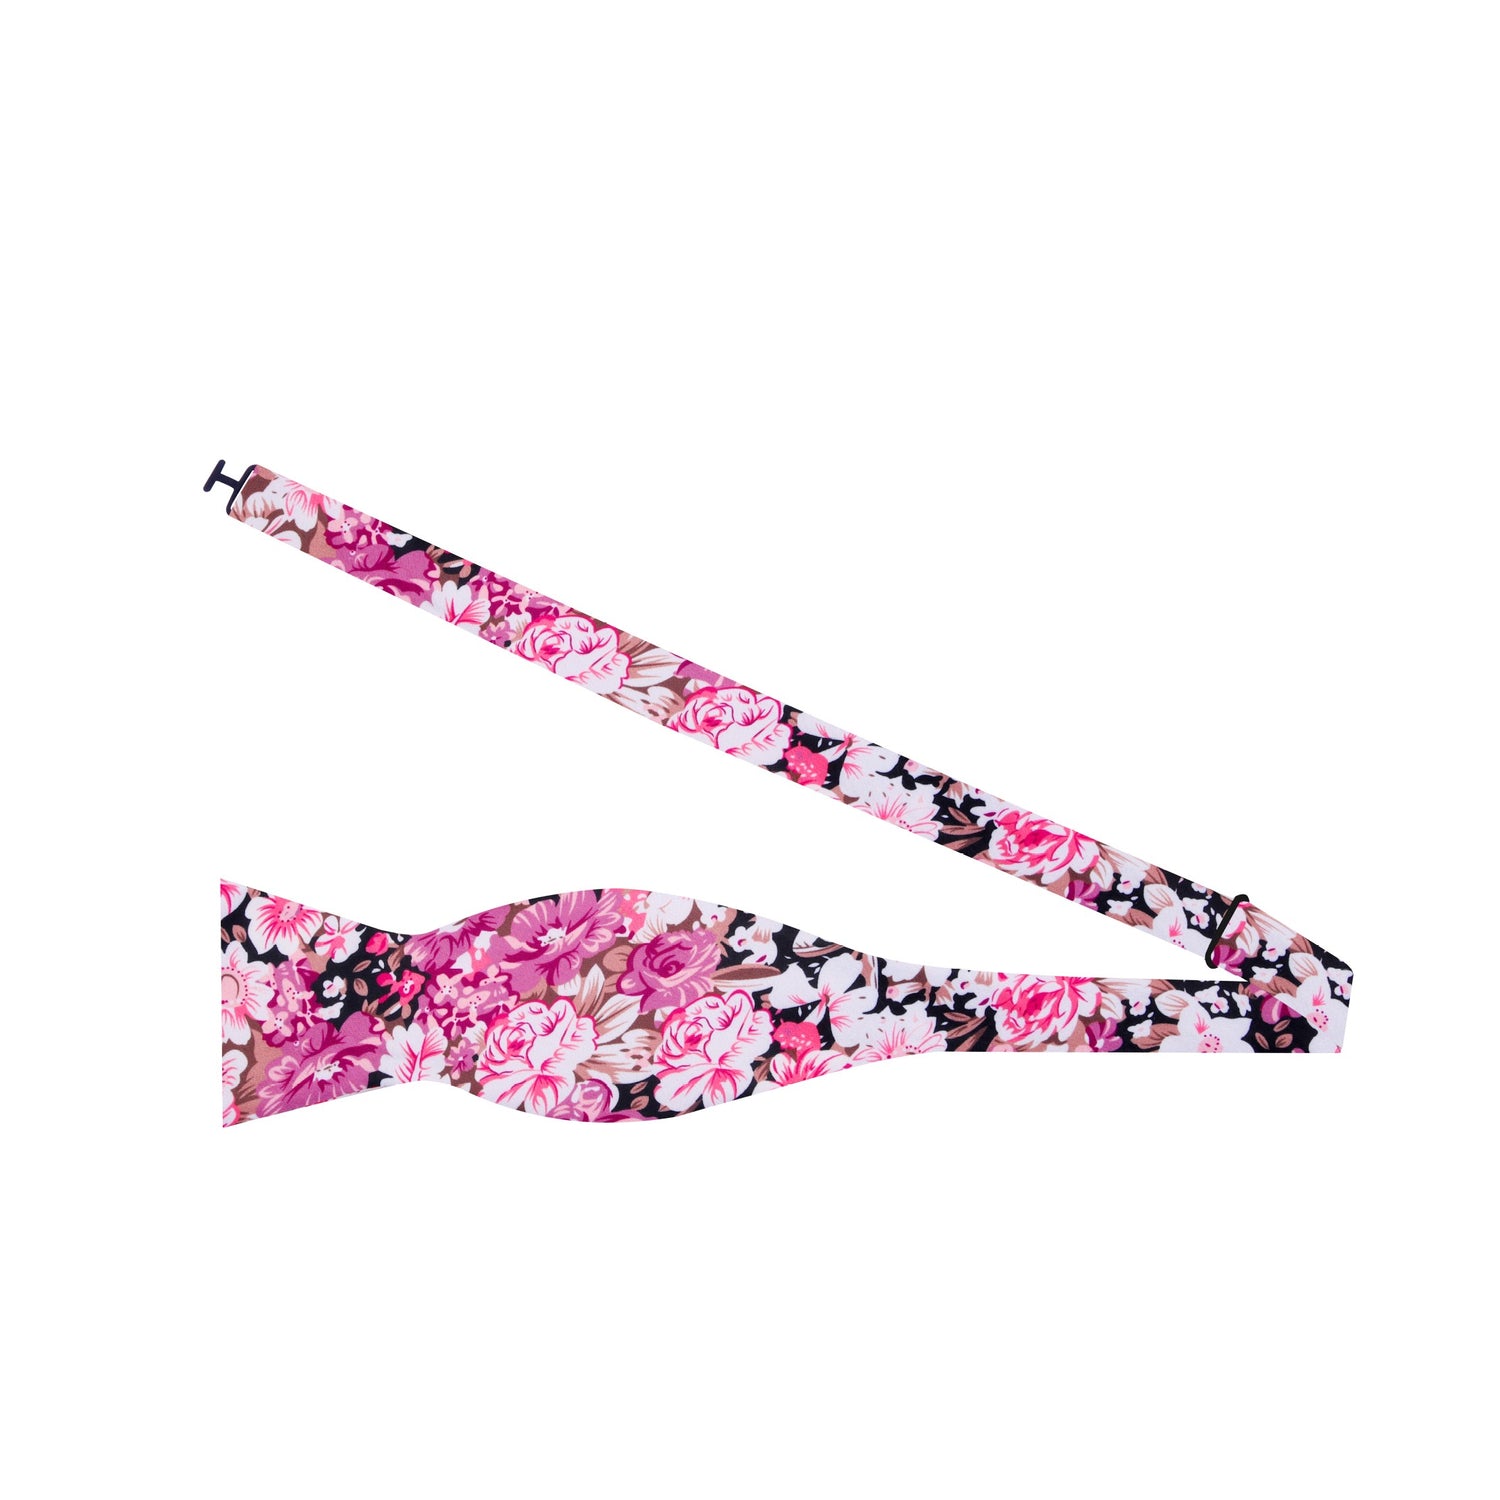 Shades of Purple and Pink with White Flowers Bow Tie Self Tie